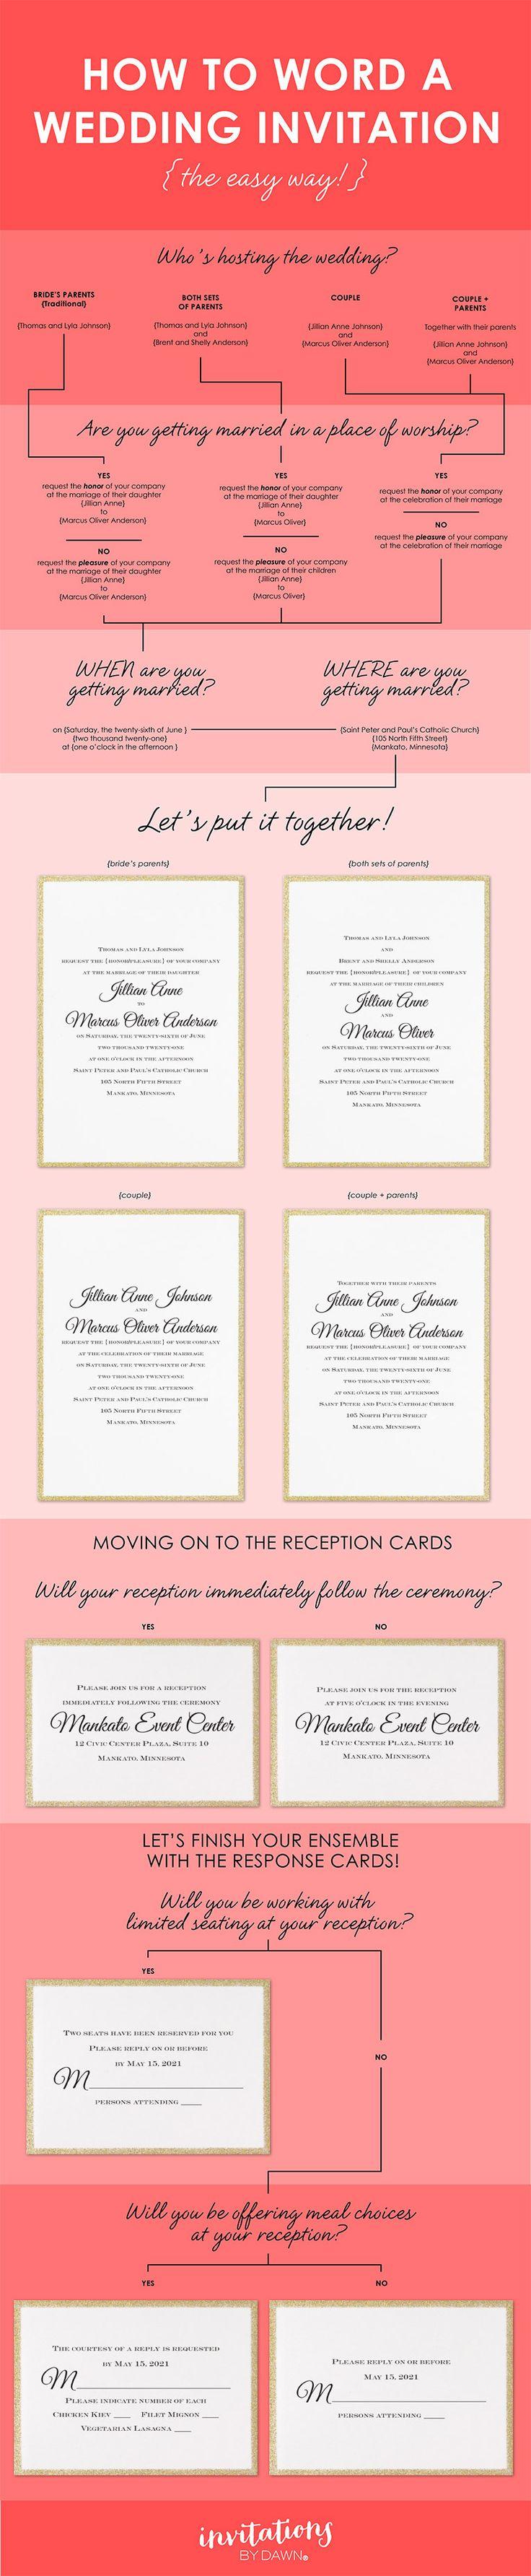 Wedding - How To Word Your Wedding Invitations